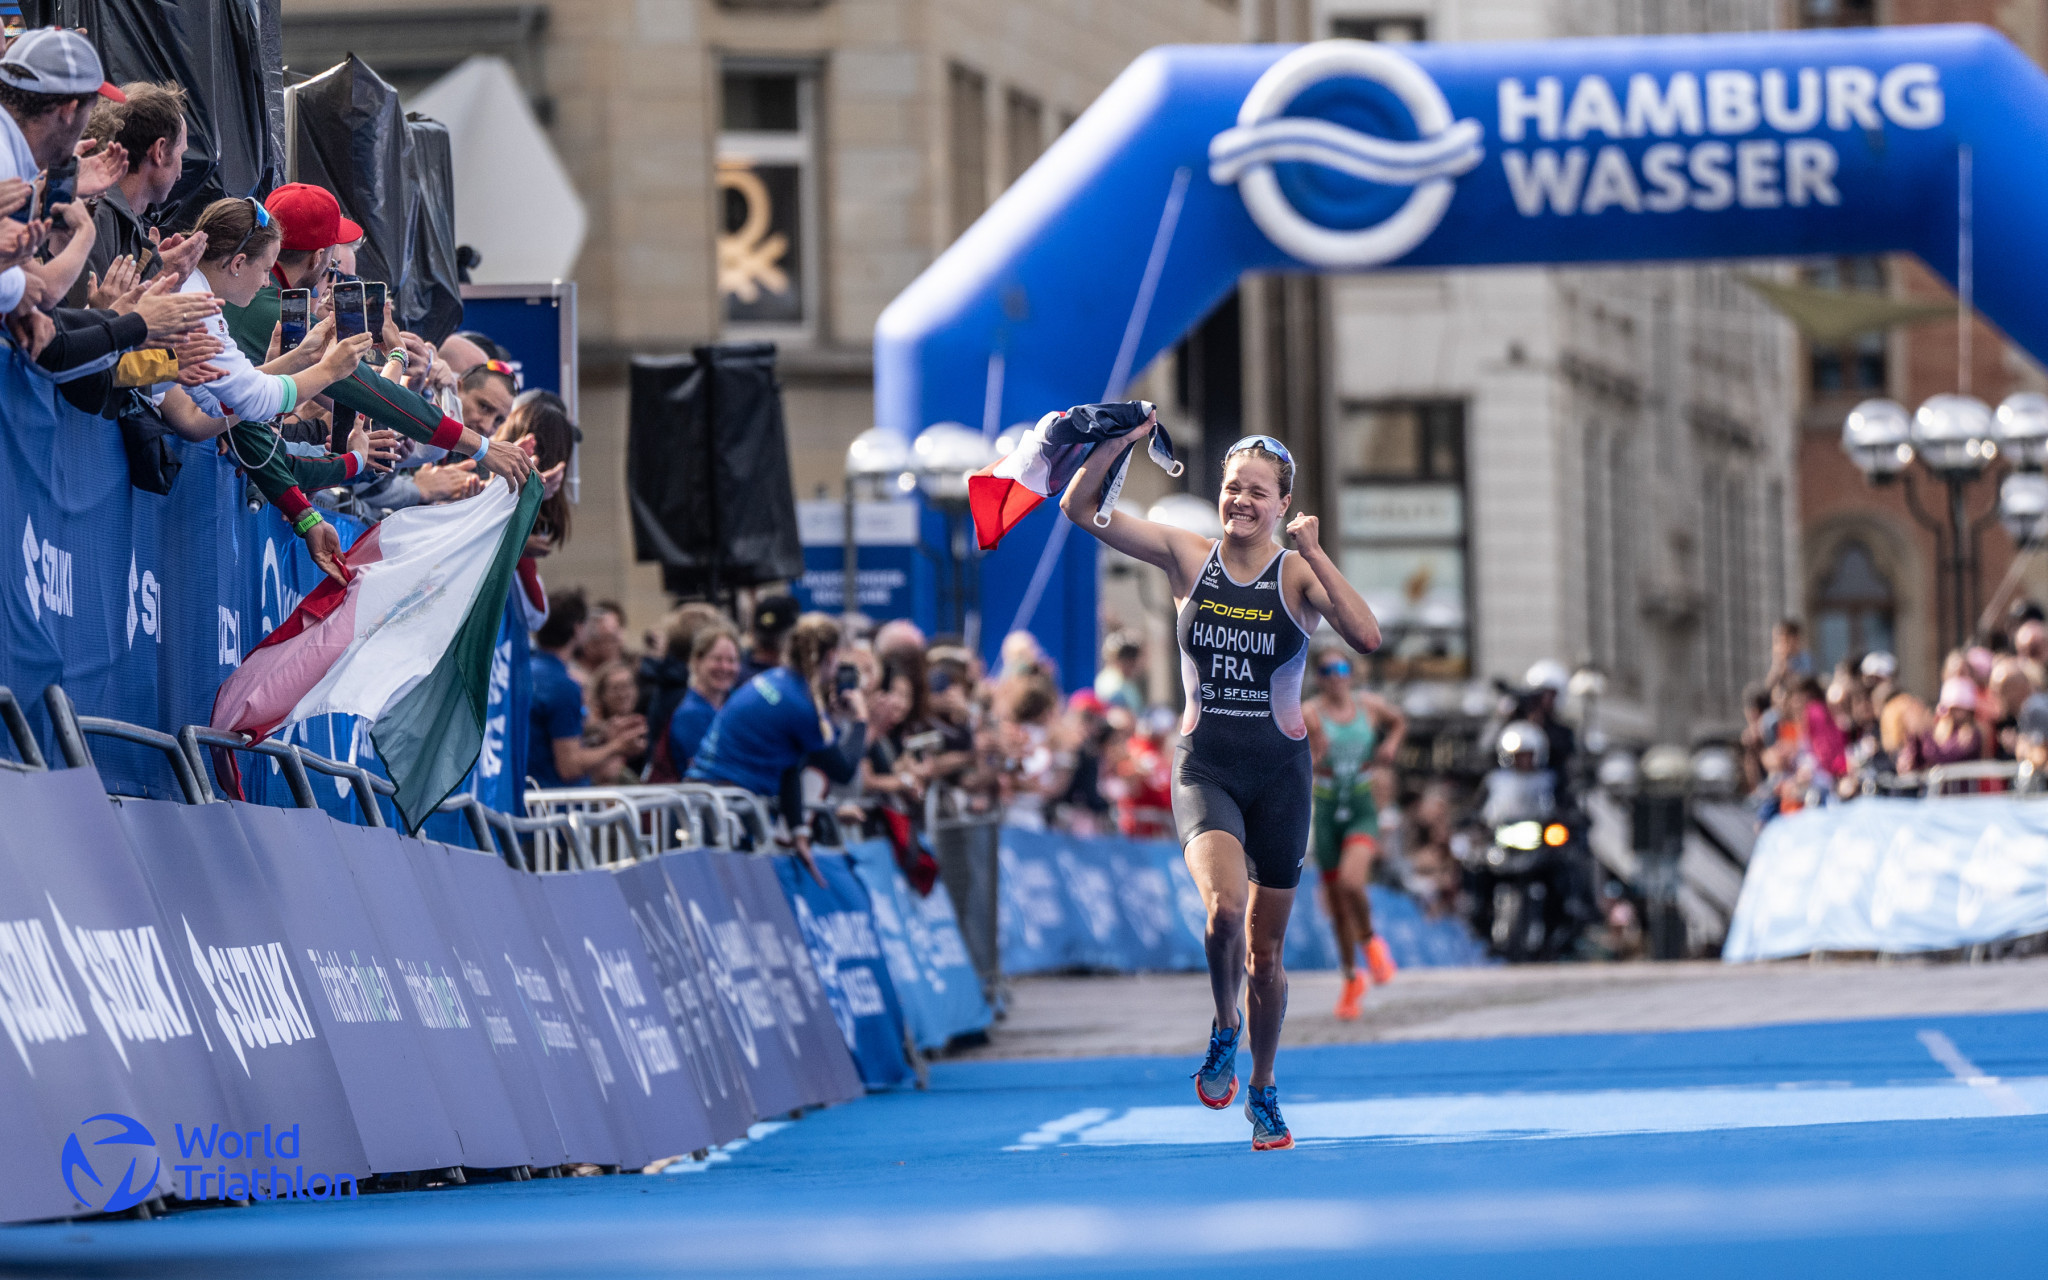 The 19-year-old clocked 56:47 to win with a blistering swim the highlight of her race ©World Triathlon